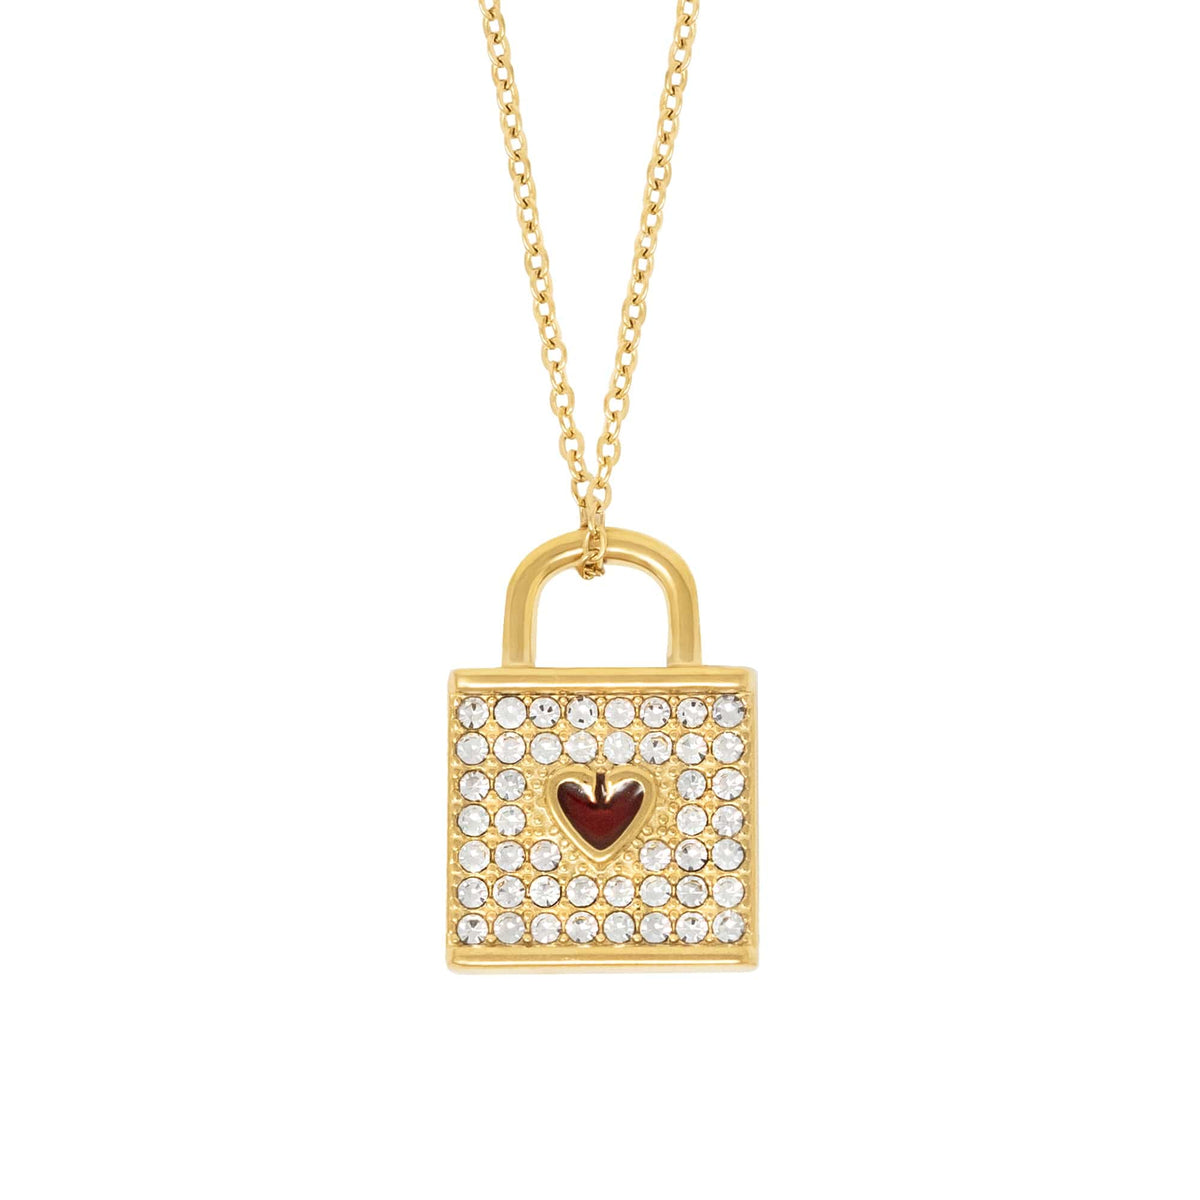 BohoMoon Stainless Steel Love Lock Necklace Gold